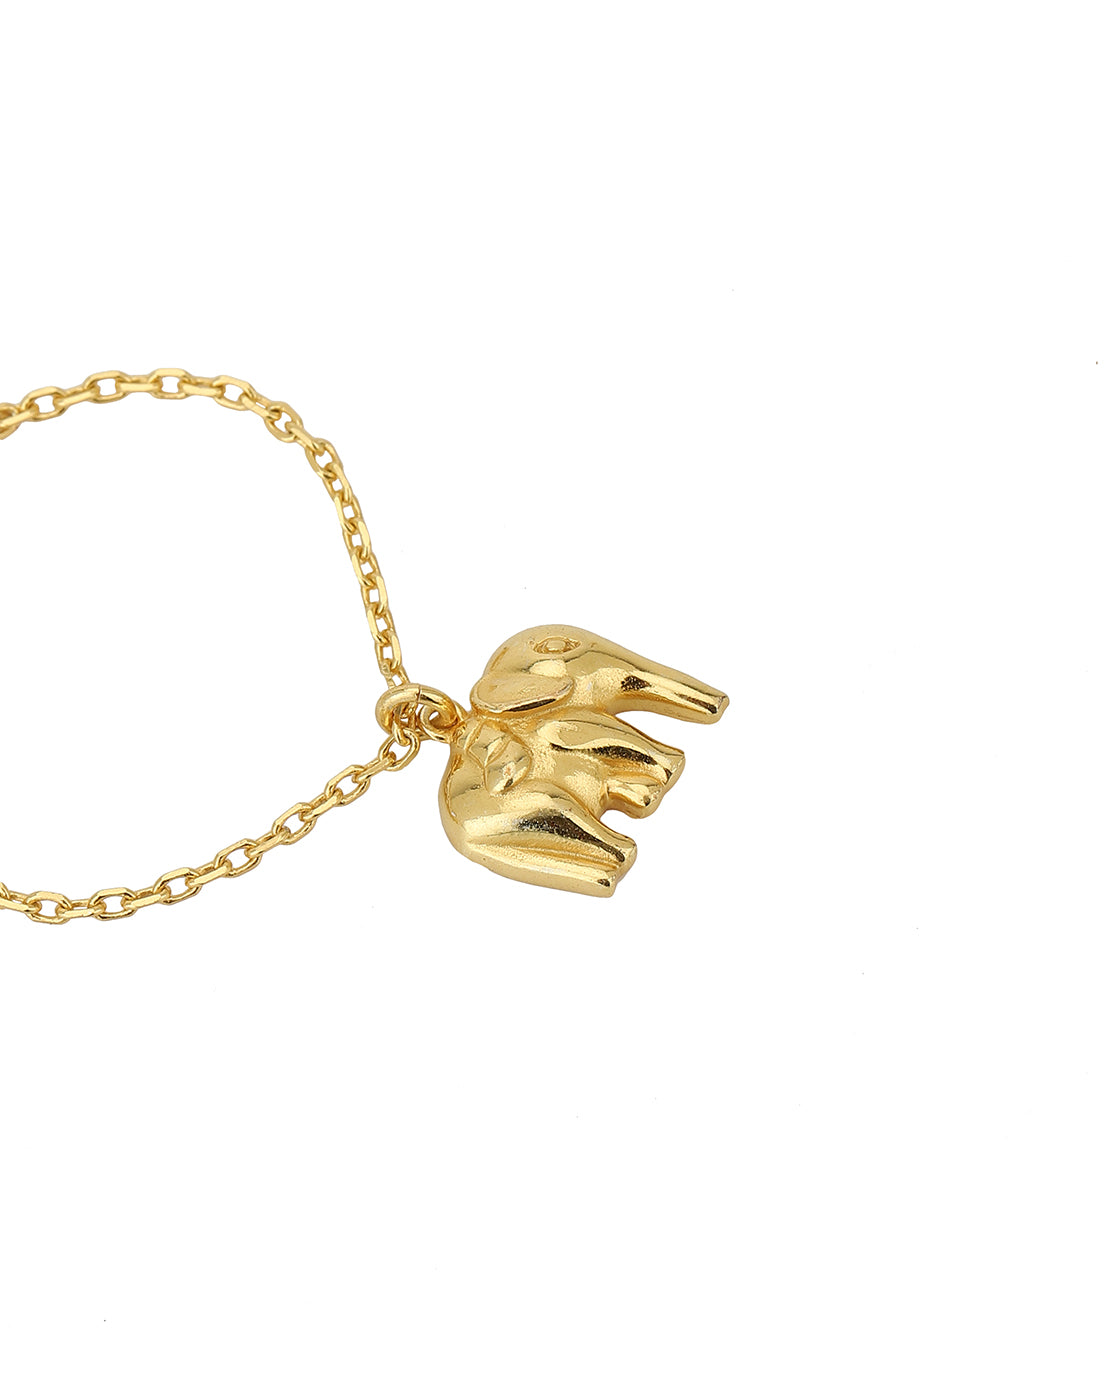 Carlton London Gold Plated Elephant Shape Non-Studded Watch Charm For Women